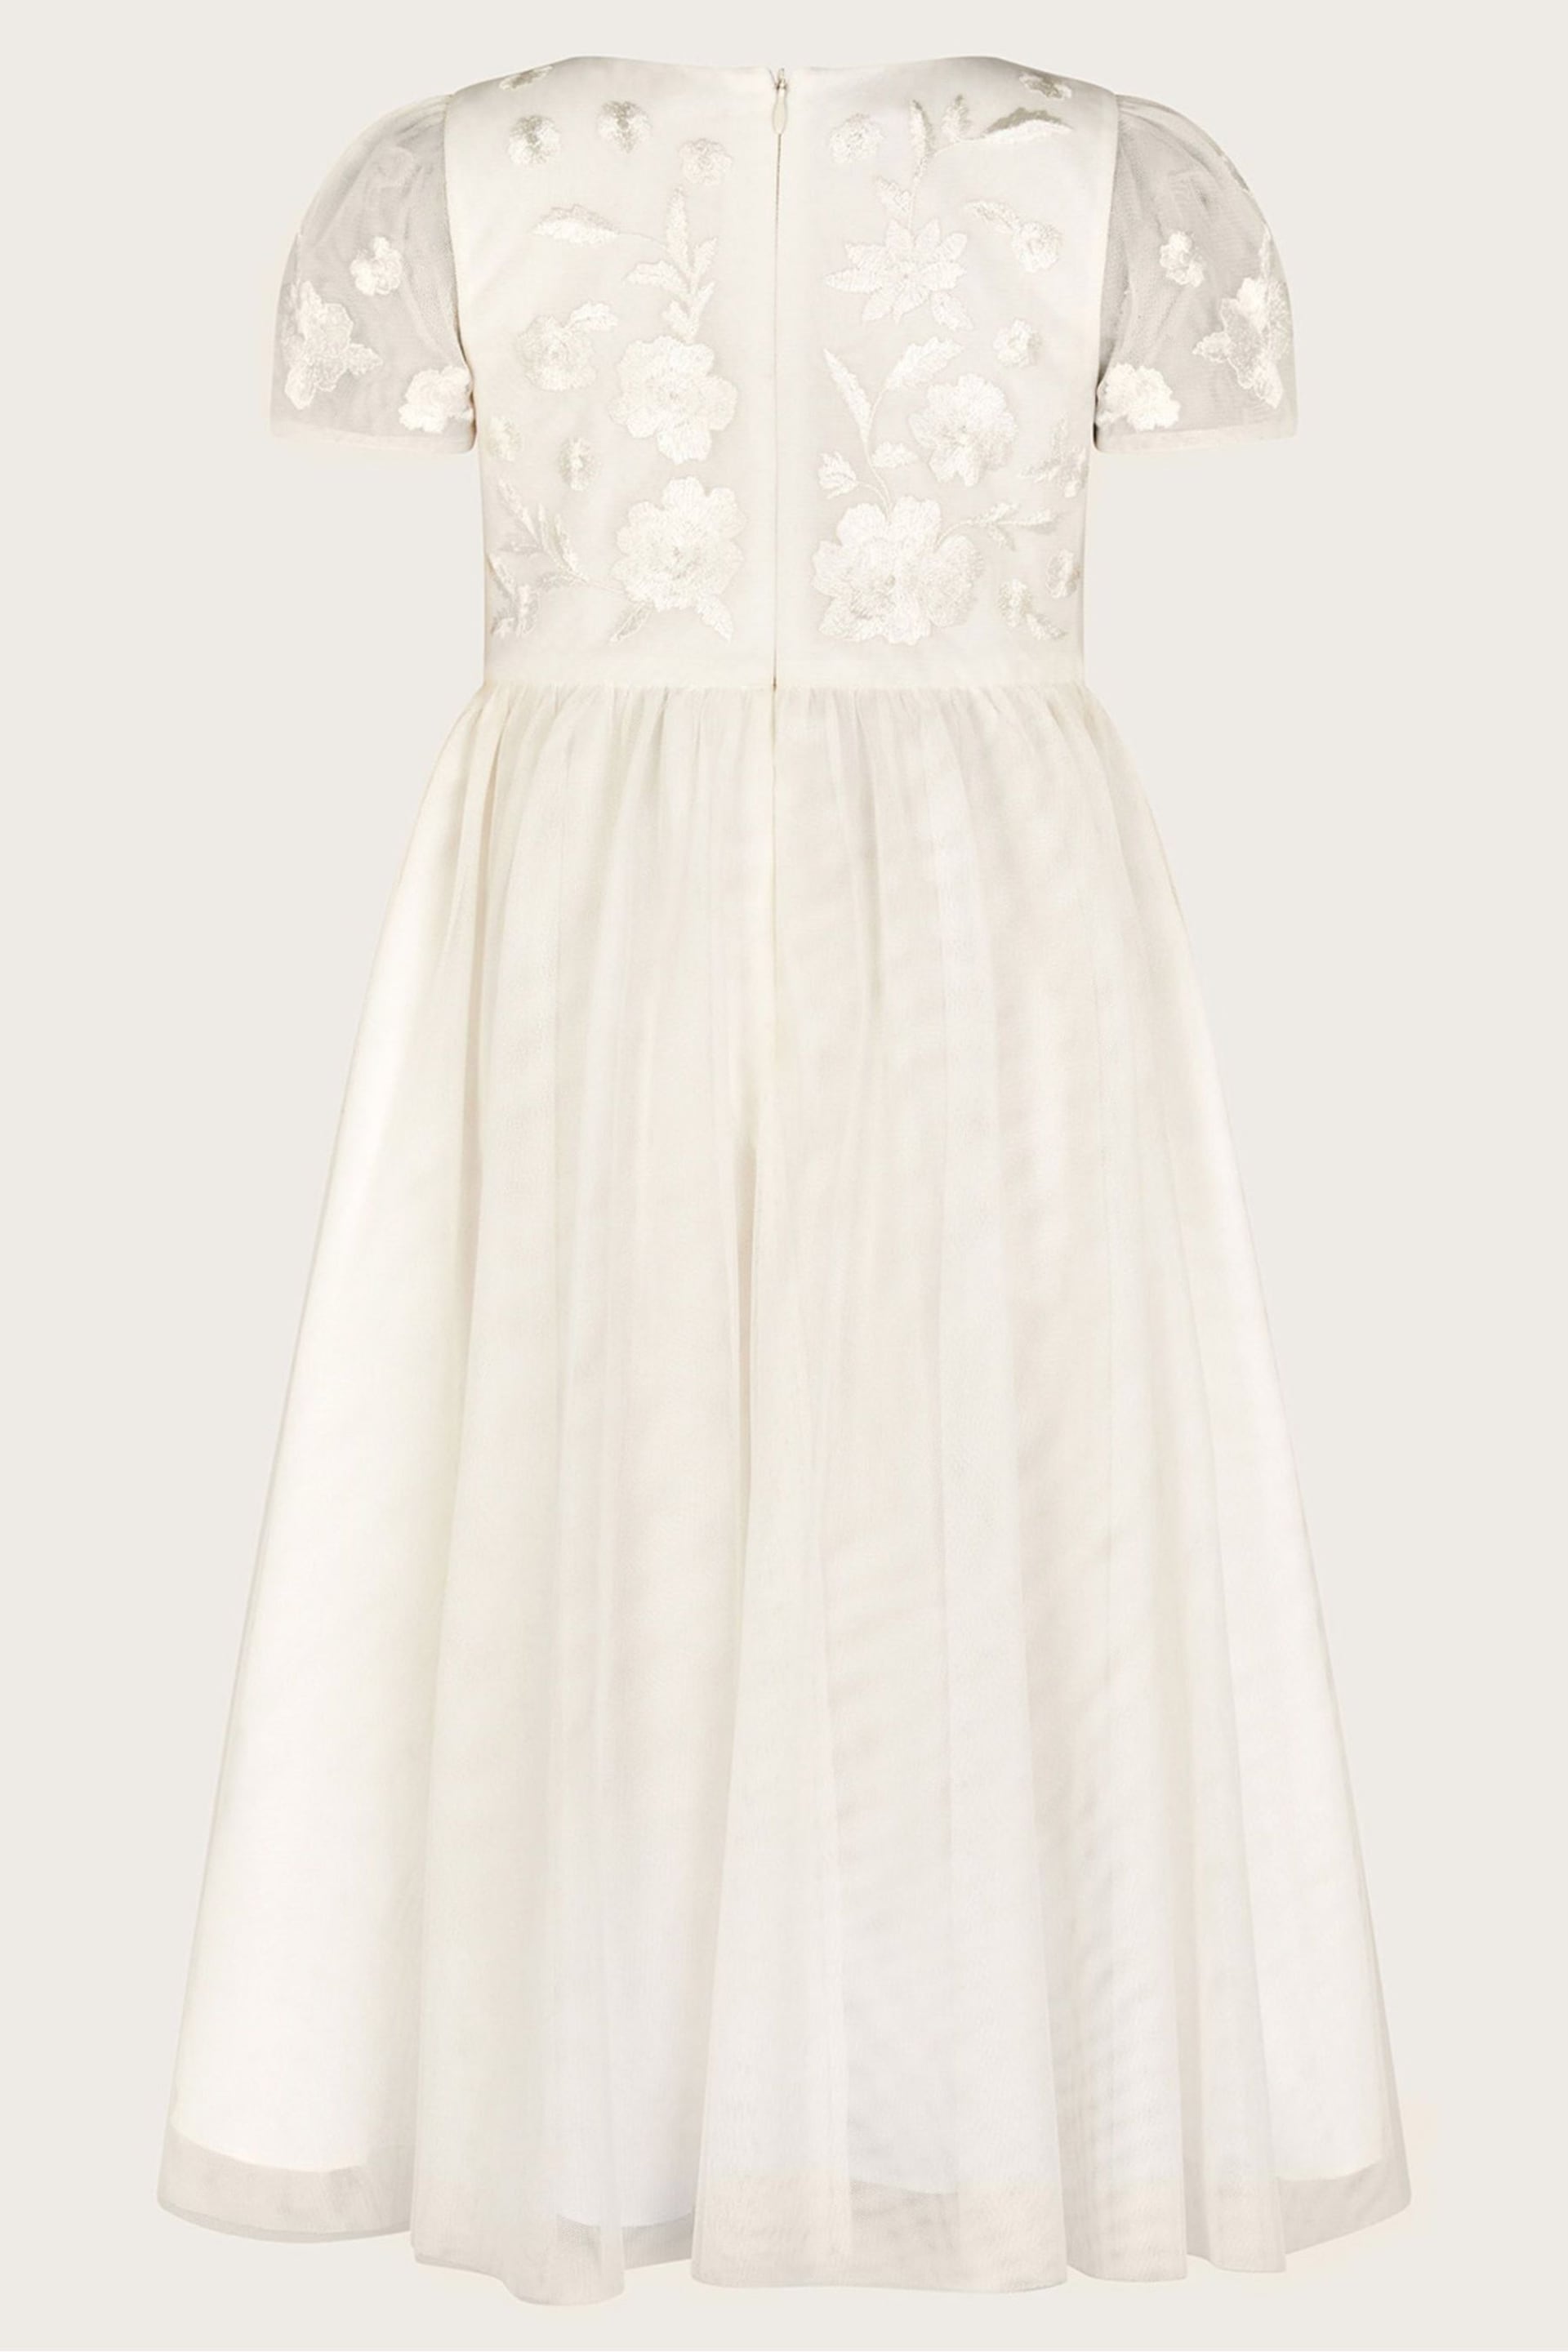 Monsoon Natural Luna Embroidered Dress - Image 2 of 3